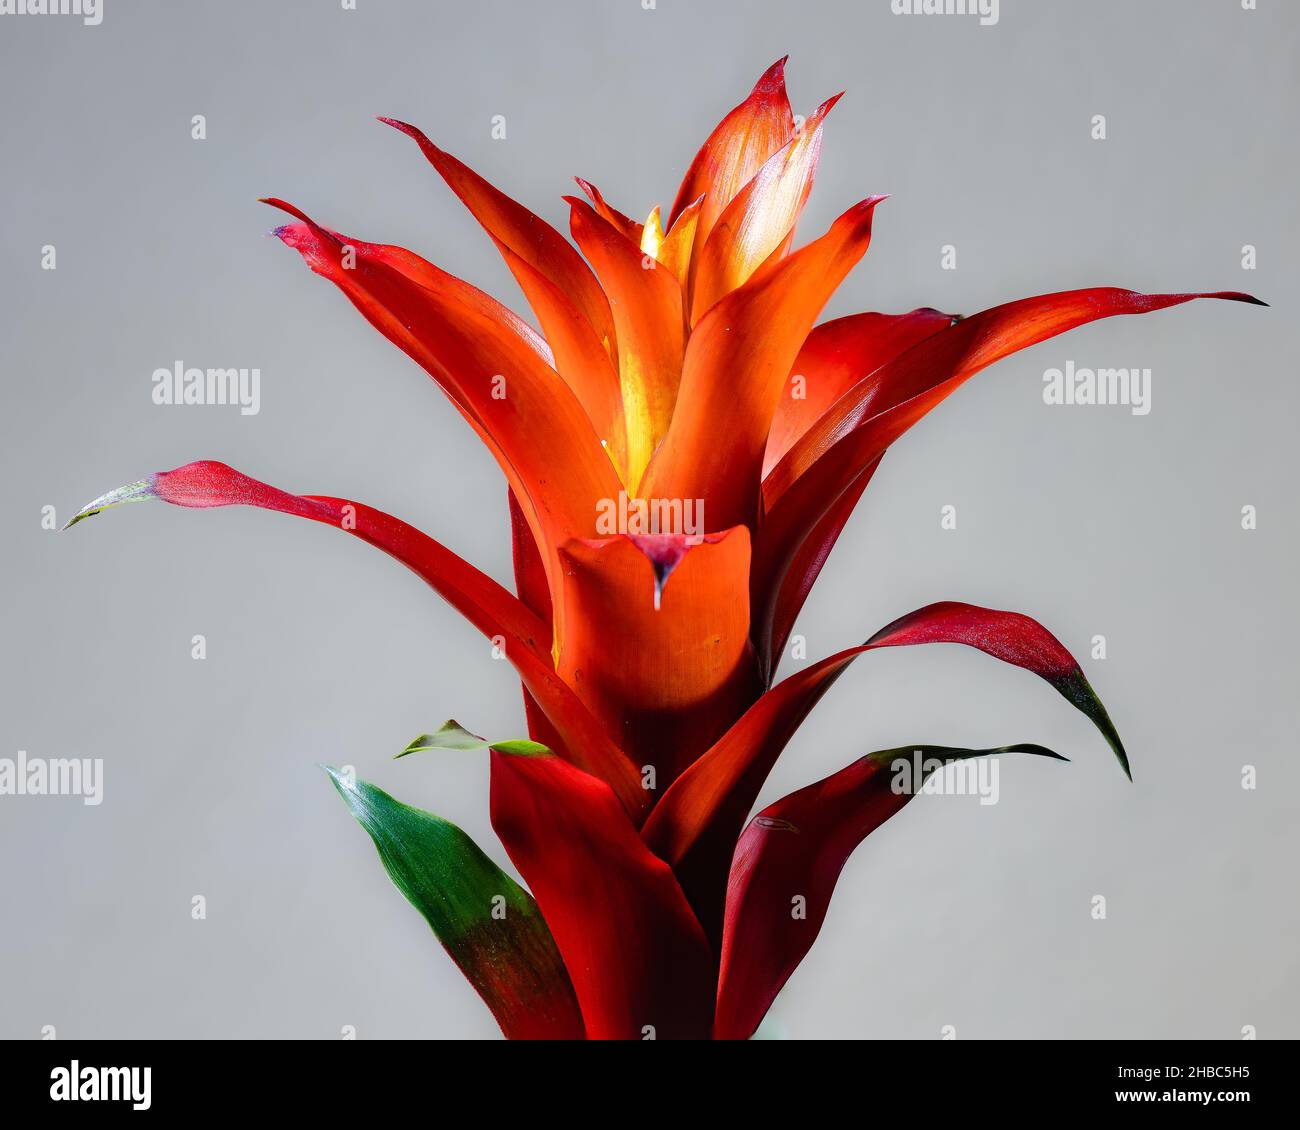 Closeup shot of a beautiful red Guzmania flower on a white background Stock Photo